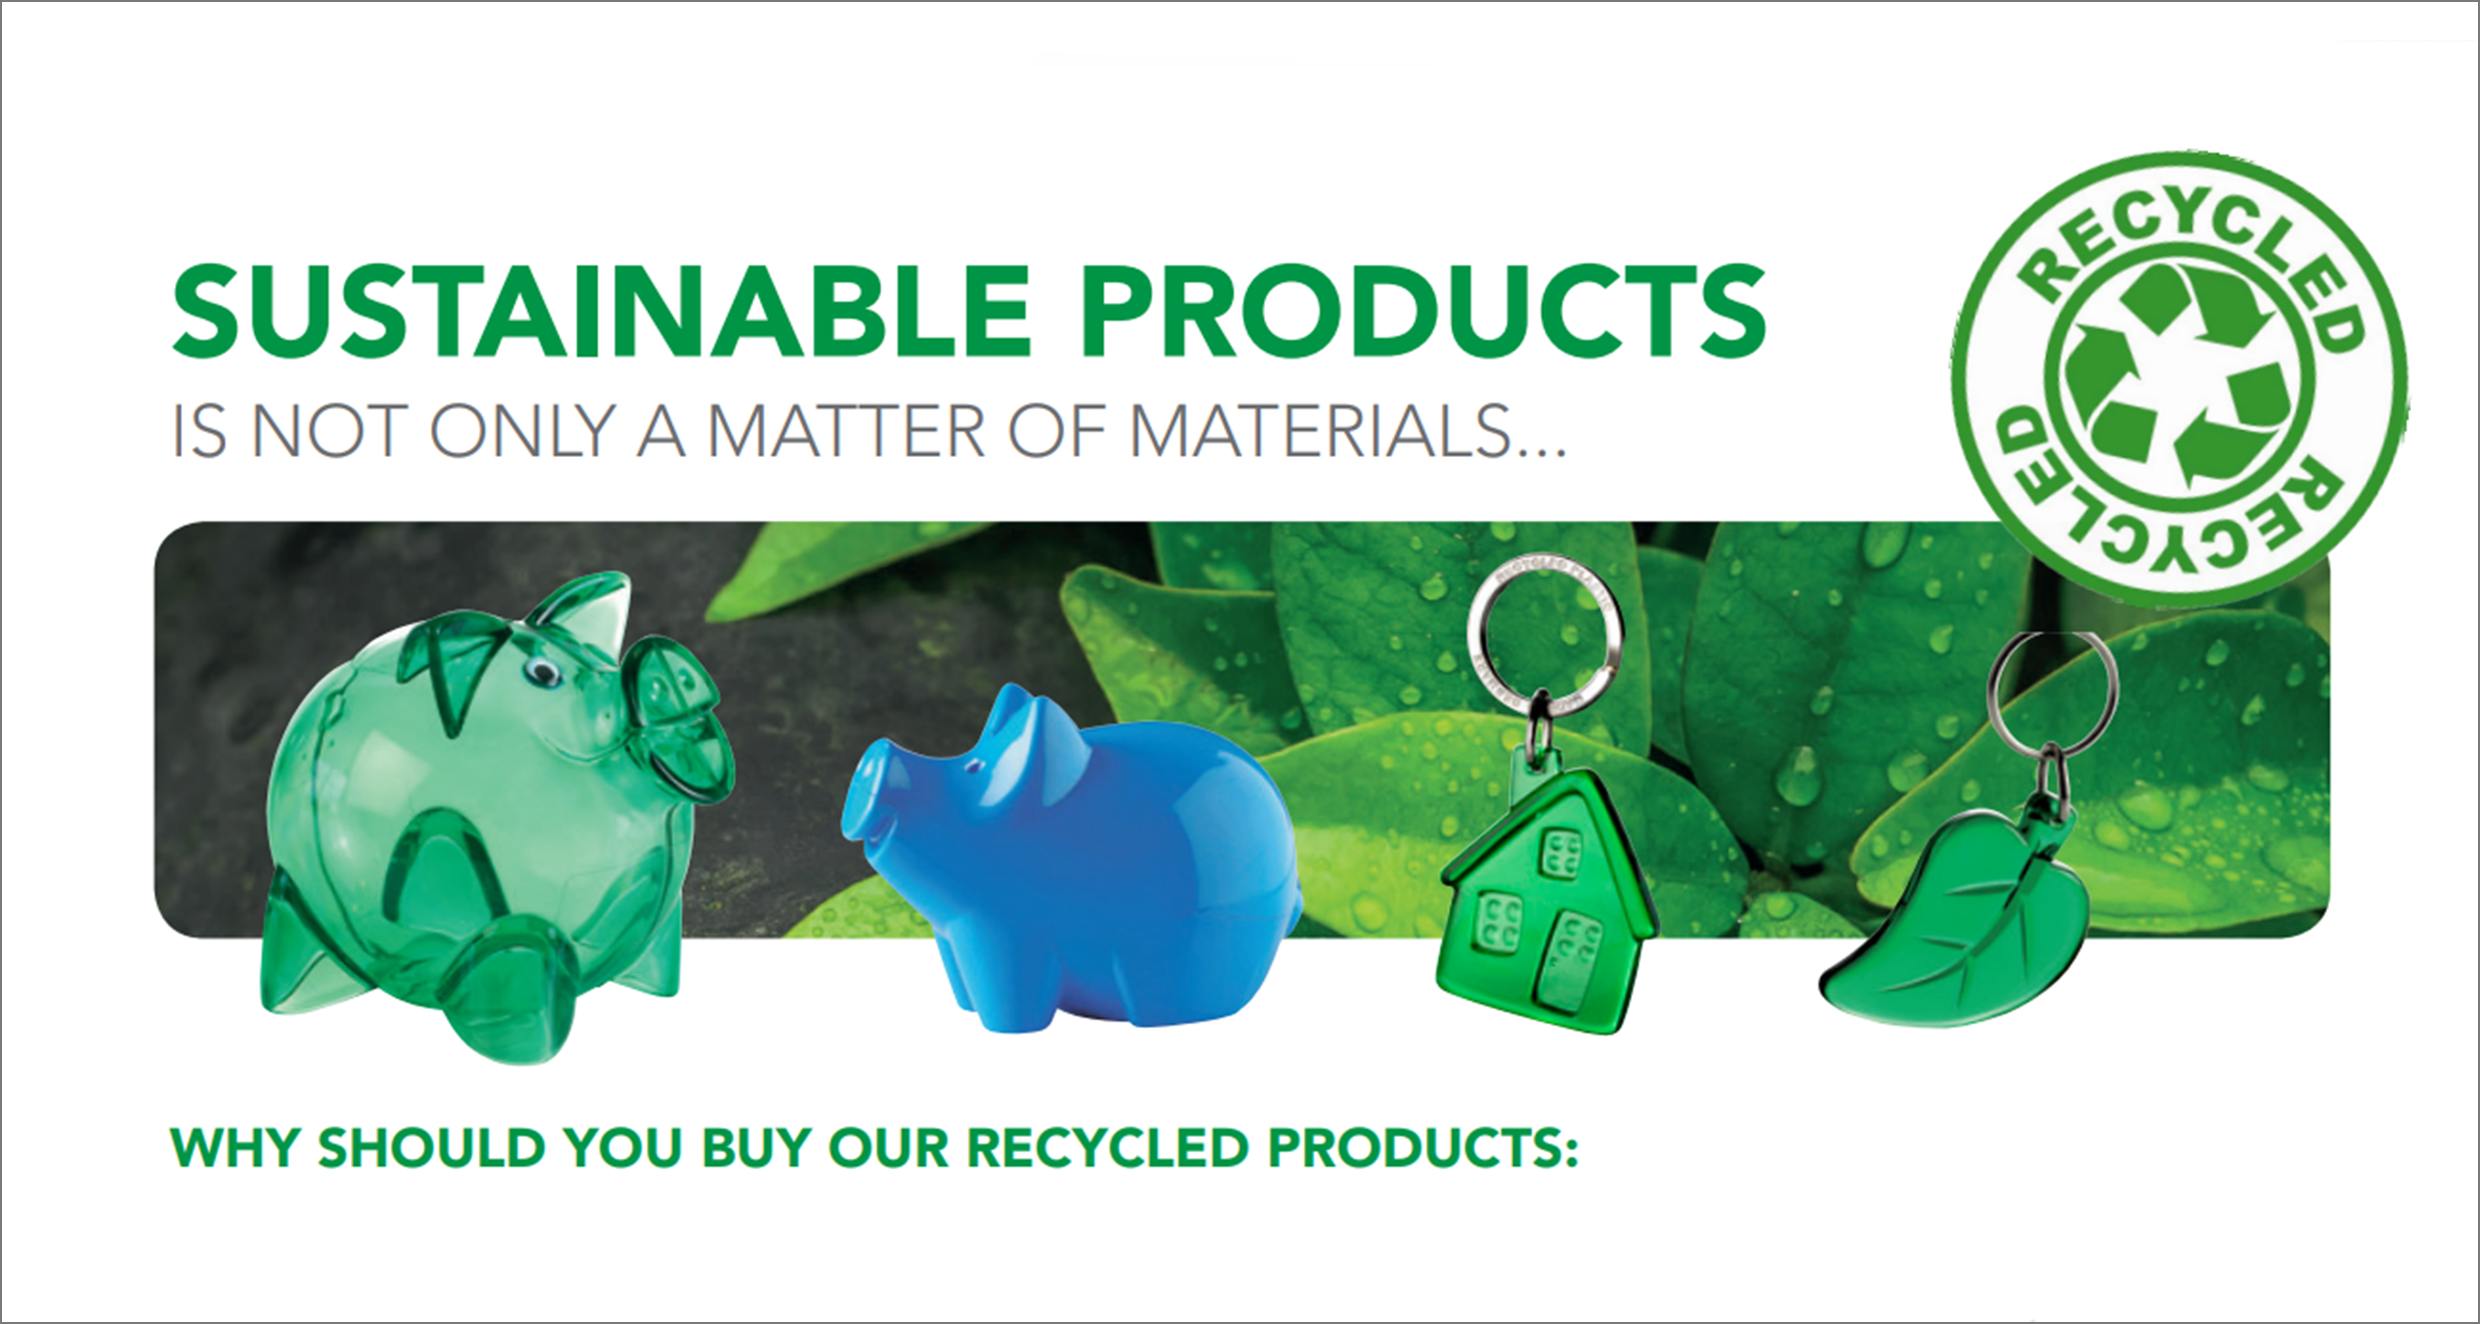 About our sustainable materials